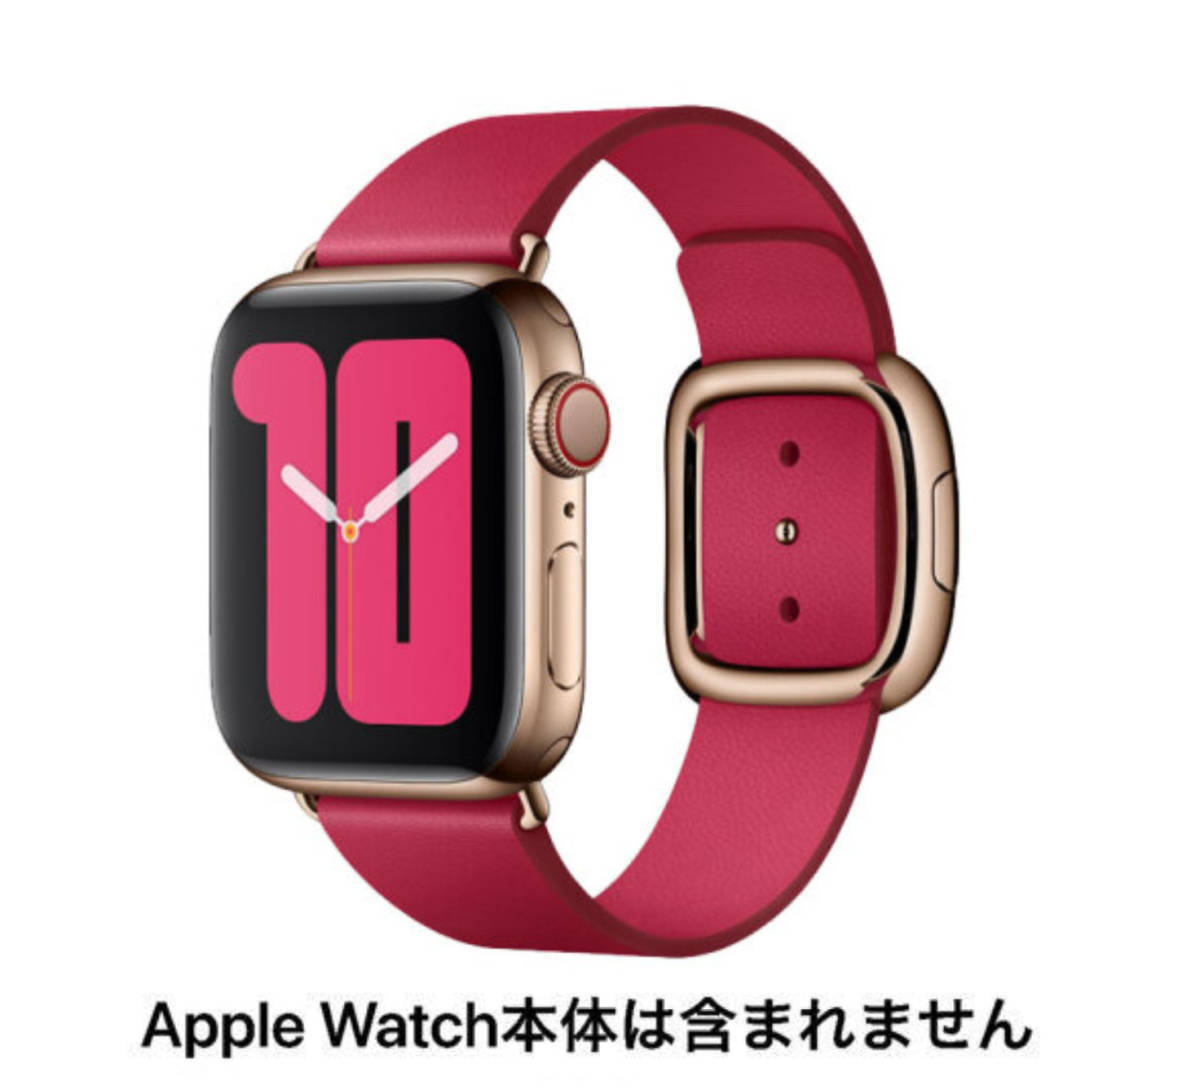 3. free shipping new goods unopened Apple original leather belt apple watch band 38mm/40mm/41mm case for (L)laz Berry modern buckle MXPC2FE regular goods 